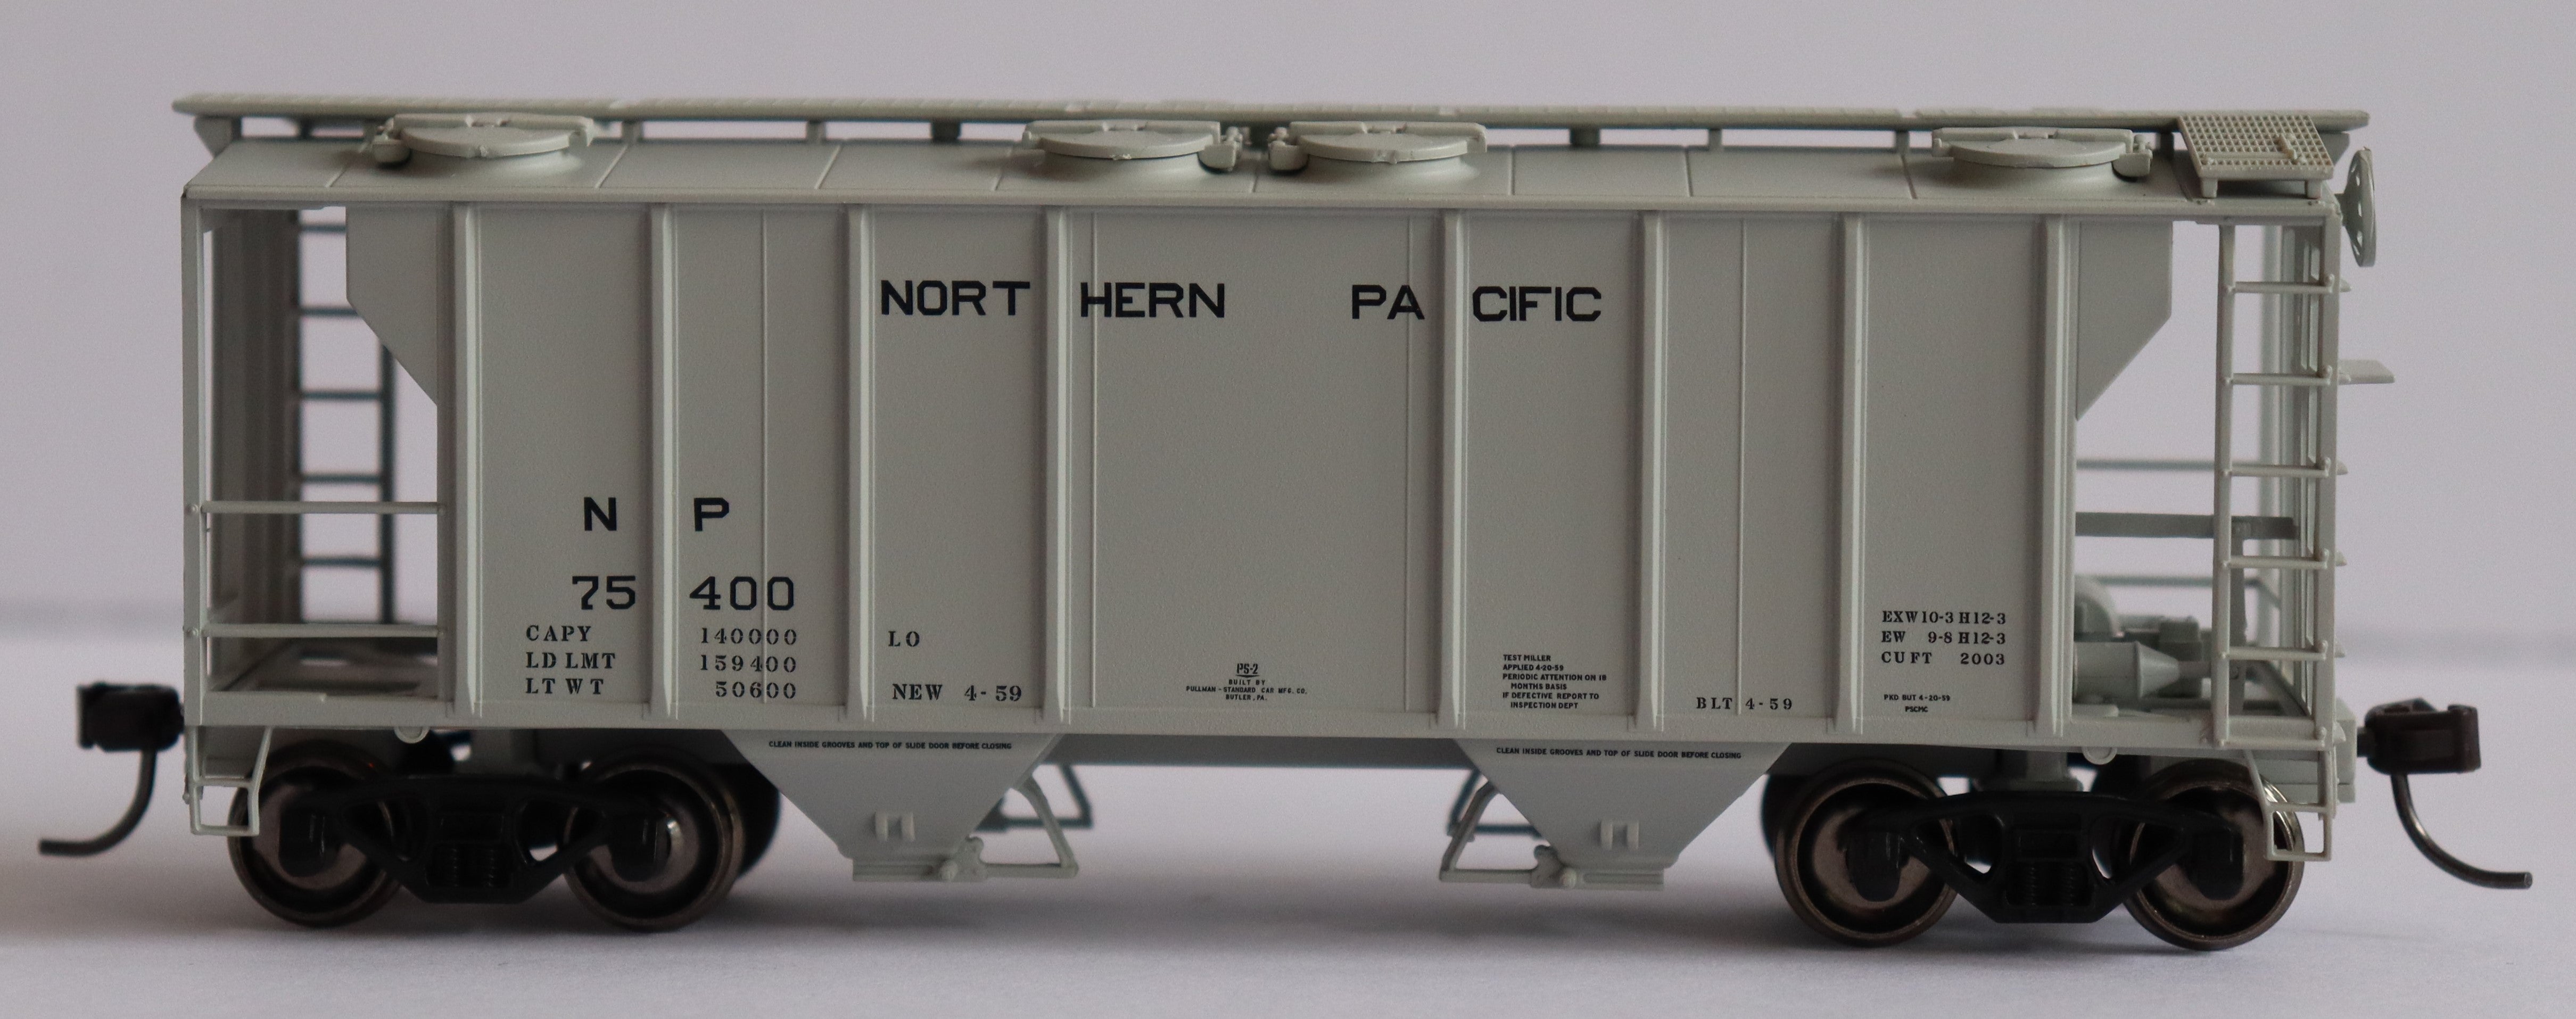 Atlas AHO-20006566 HO TM PS-2 COVERED HOPPER NORTHERN PACIFIC #75446